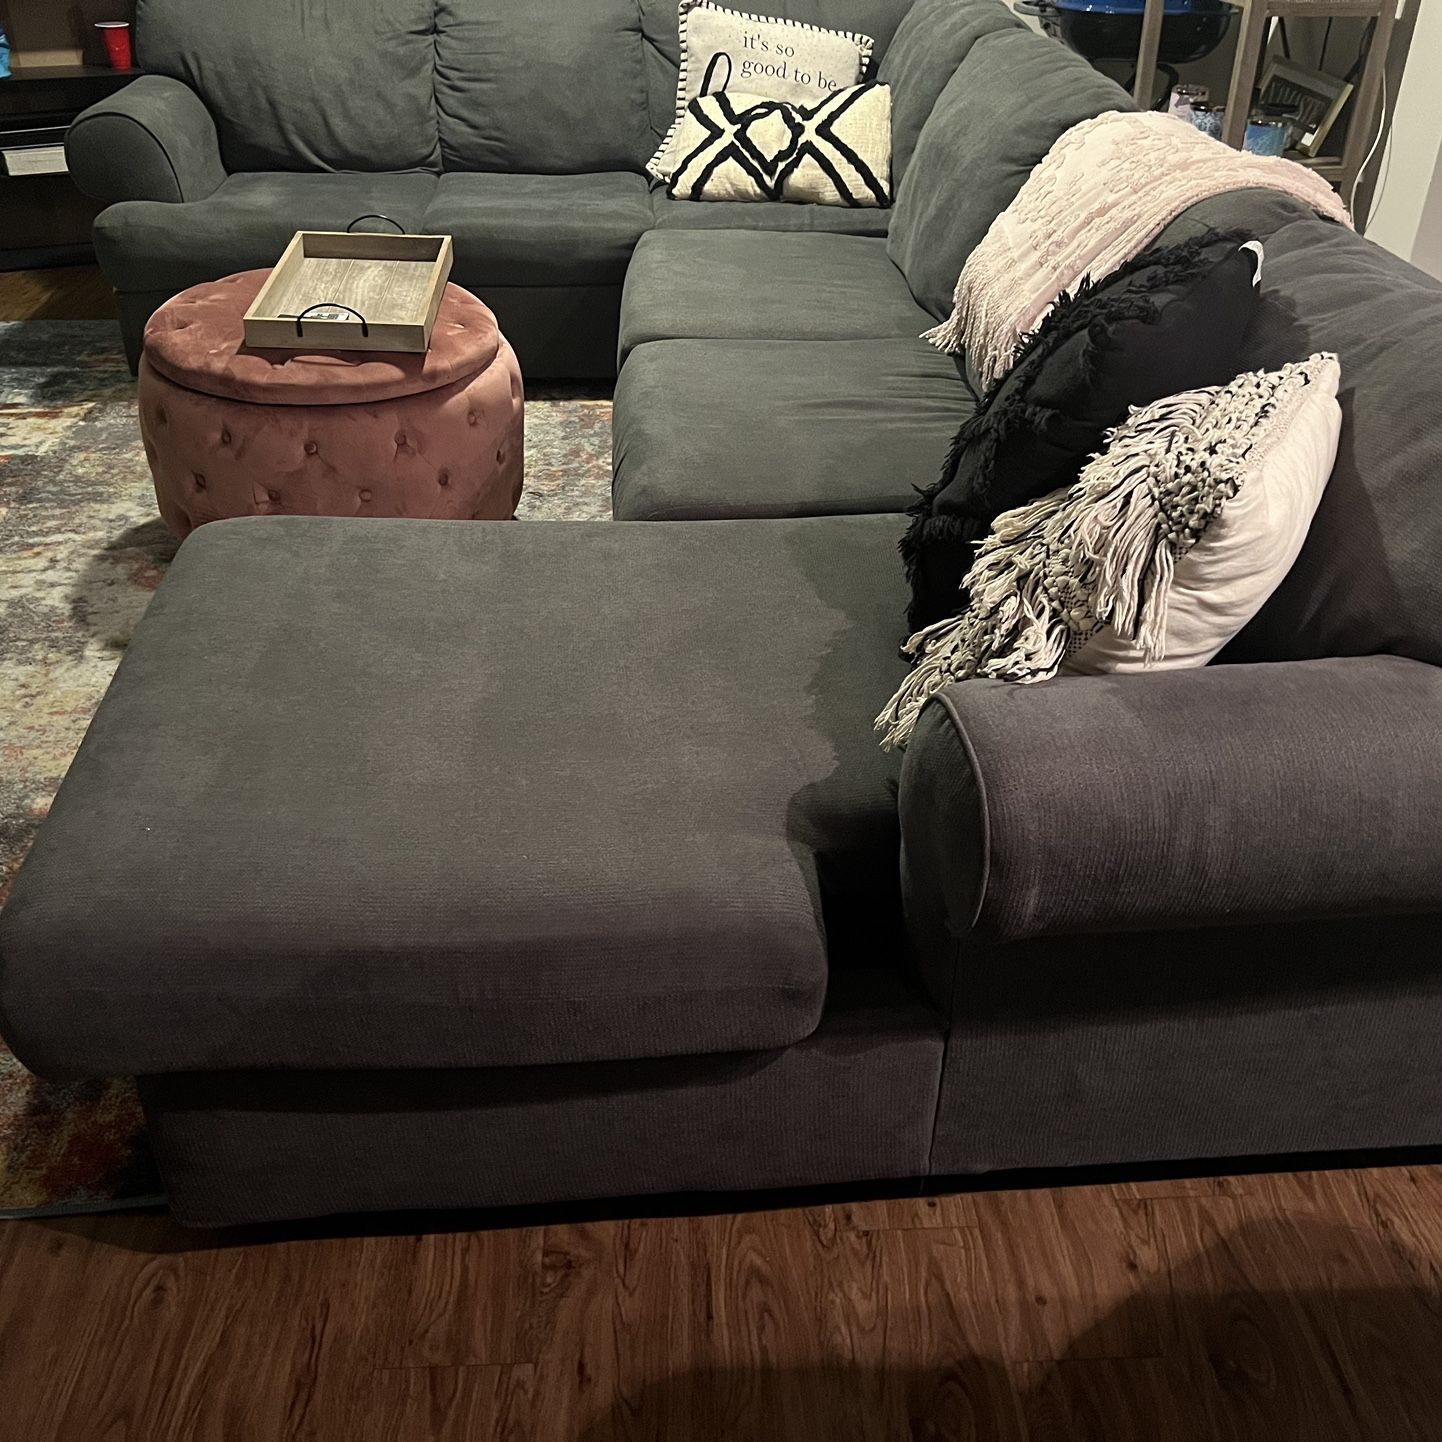 Large Grey Sectional Good Condition Like New 